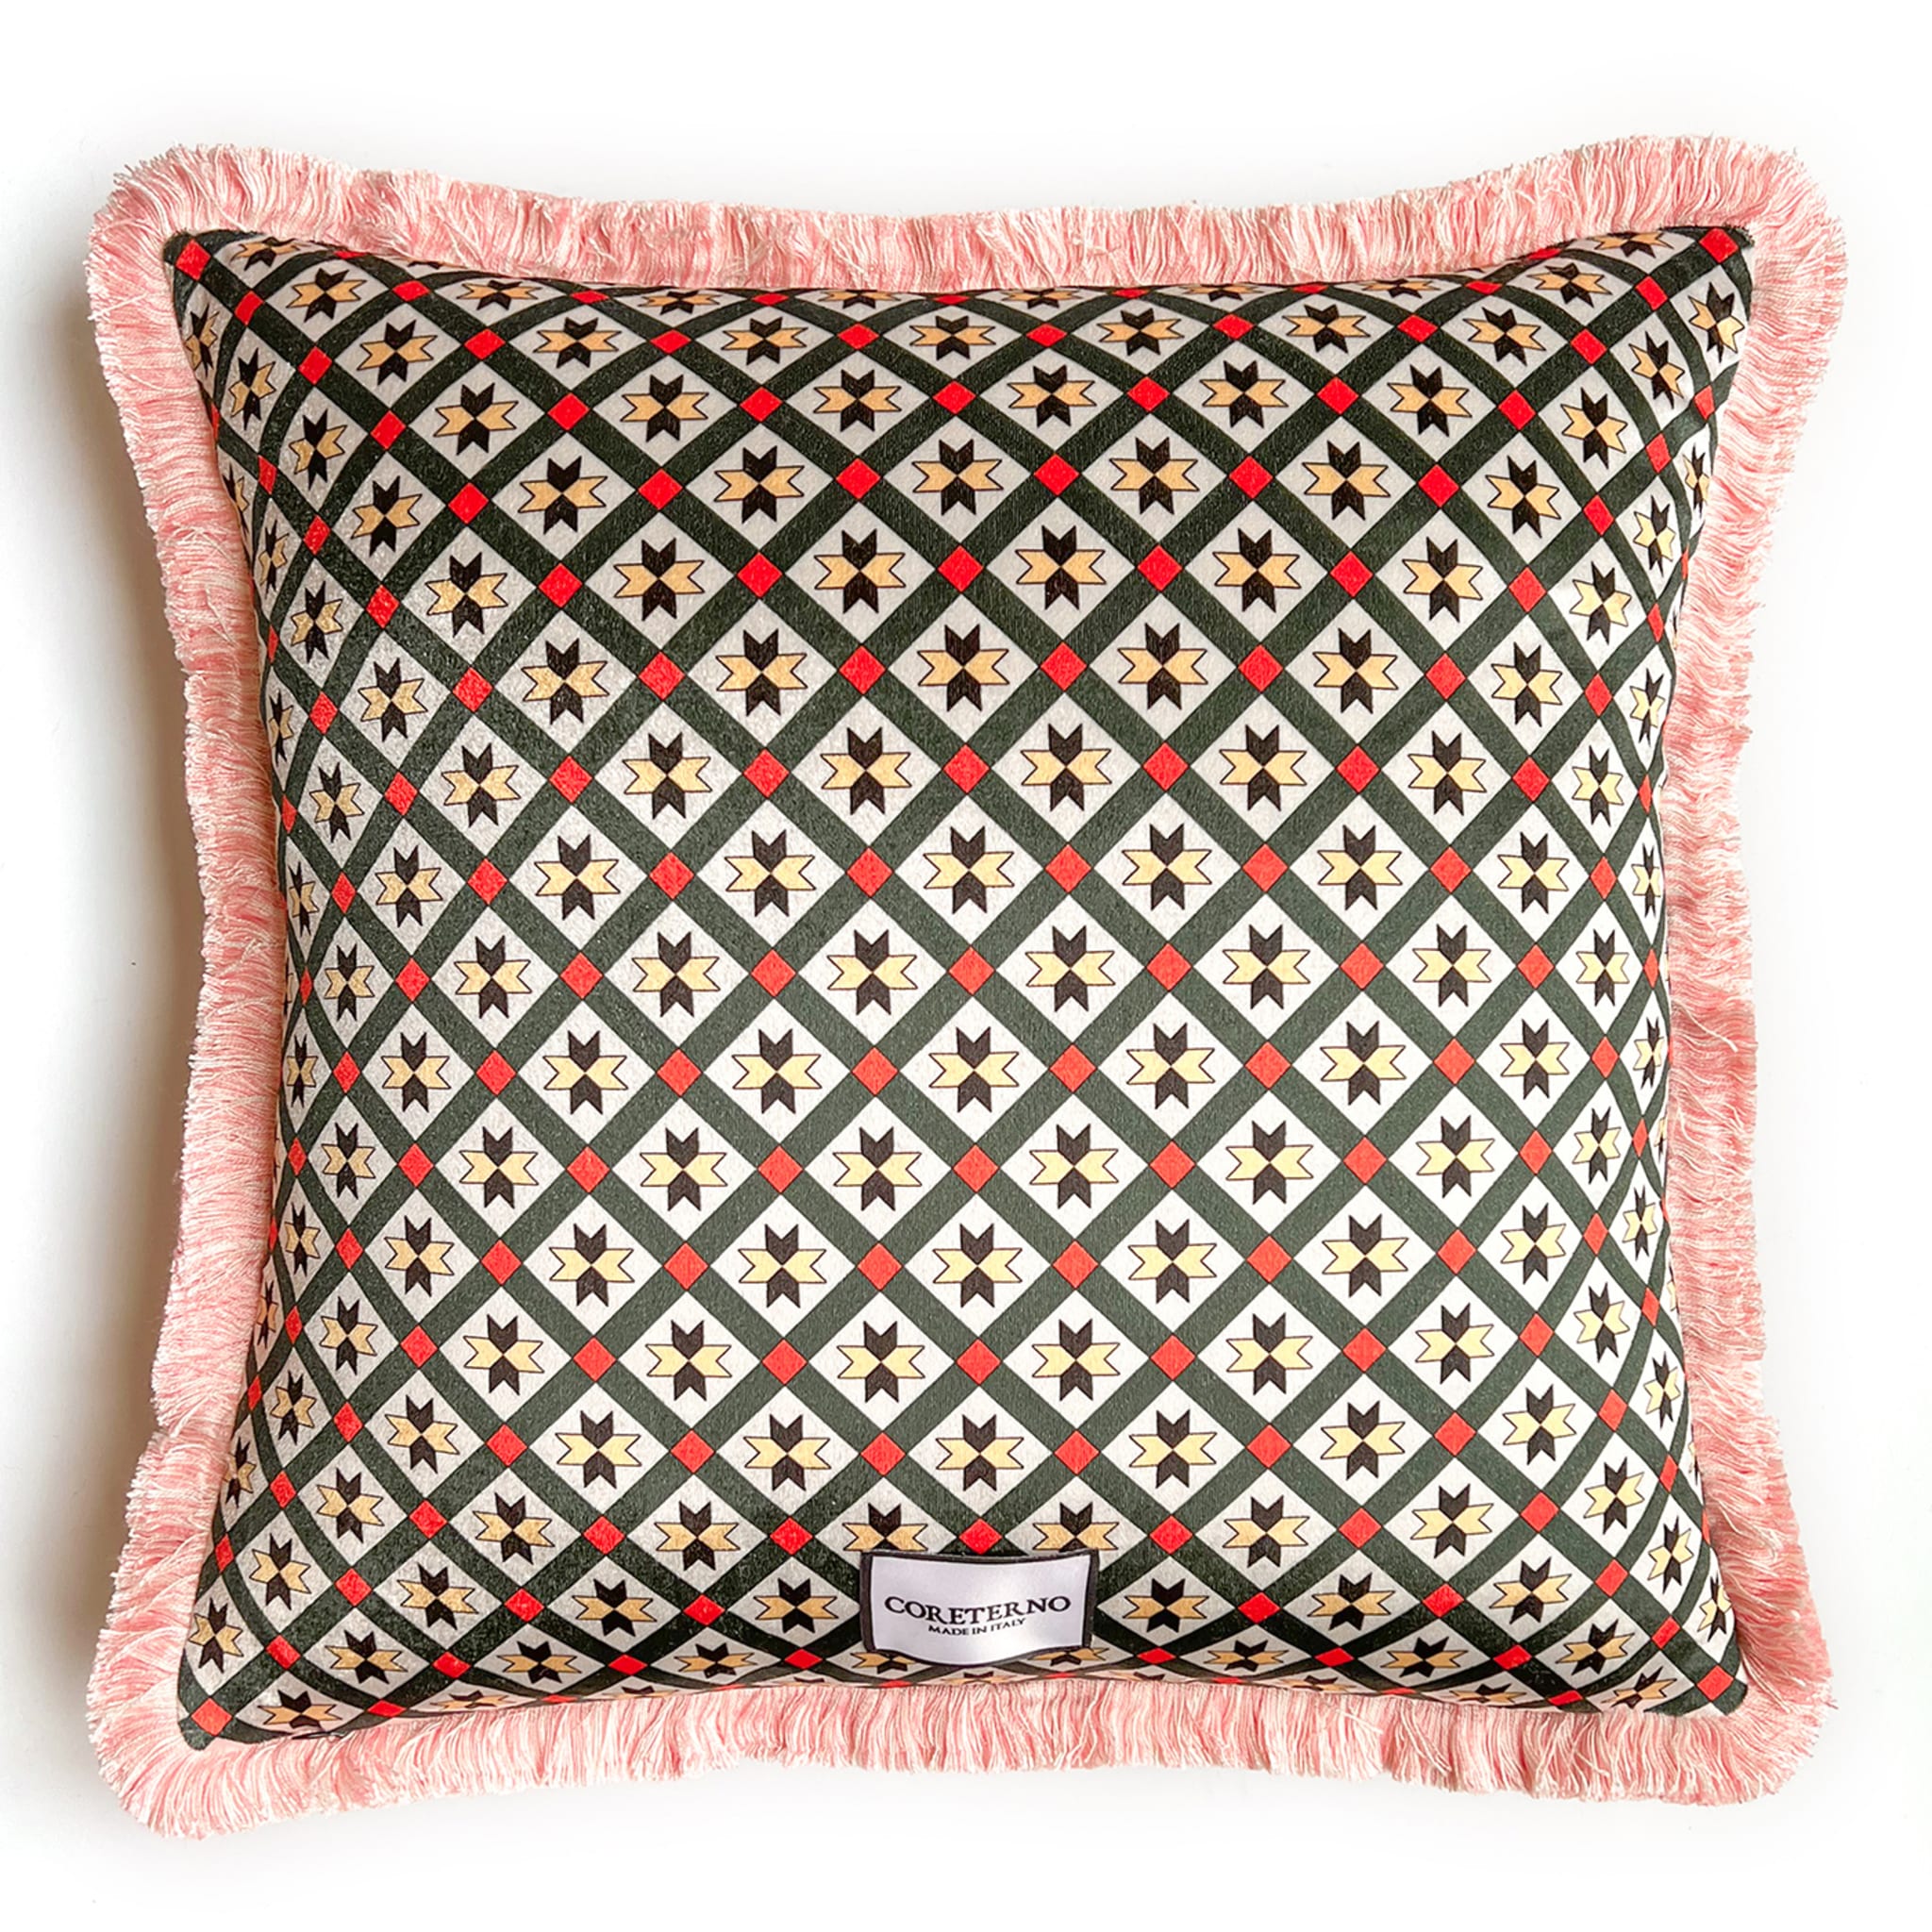 Vain Rooster Polychrome Square Cushion - Alternative view 1